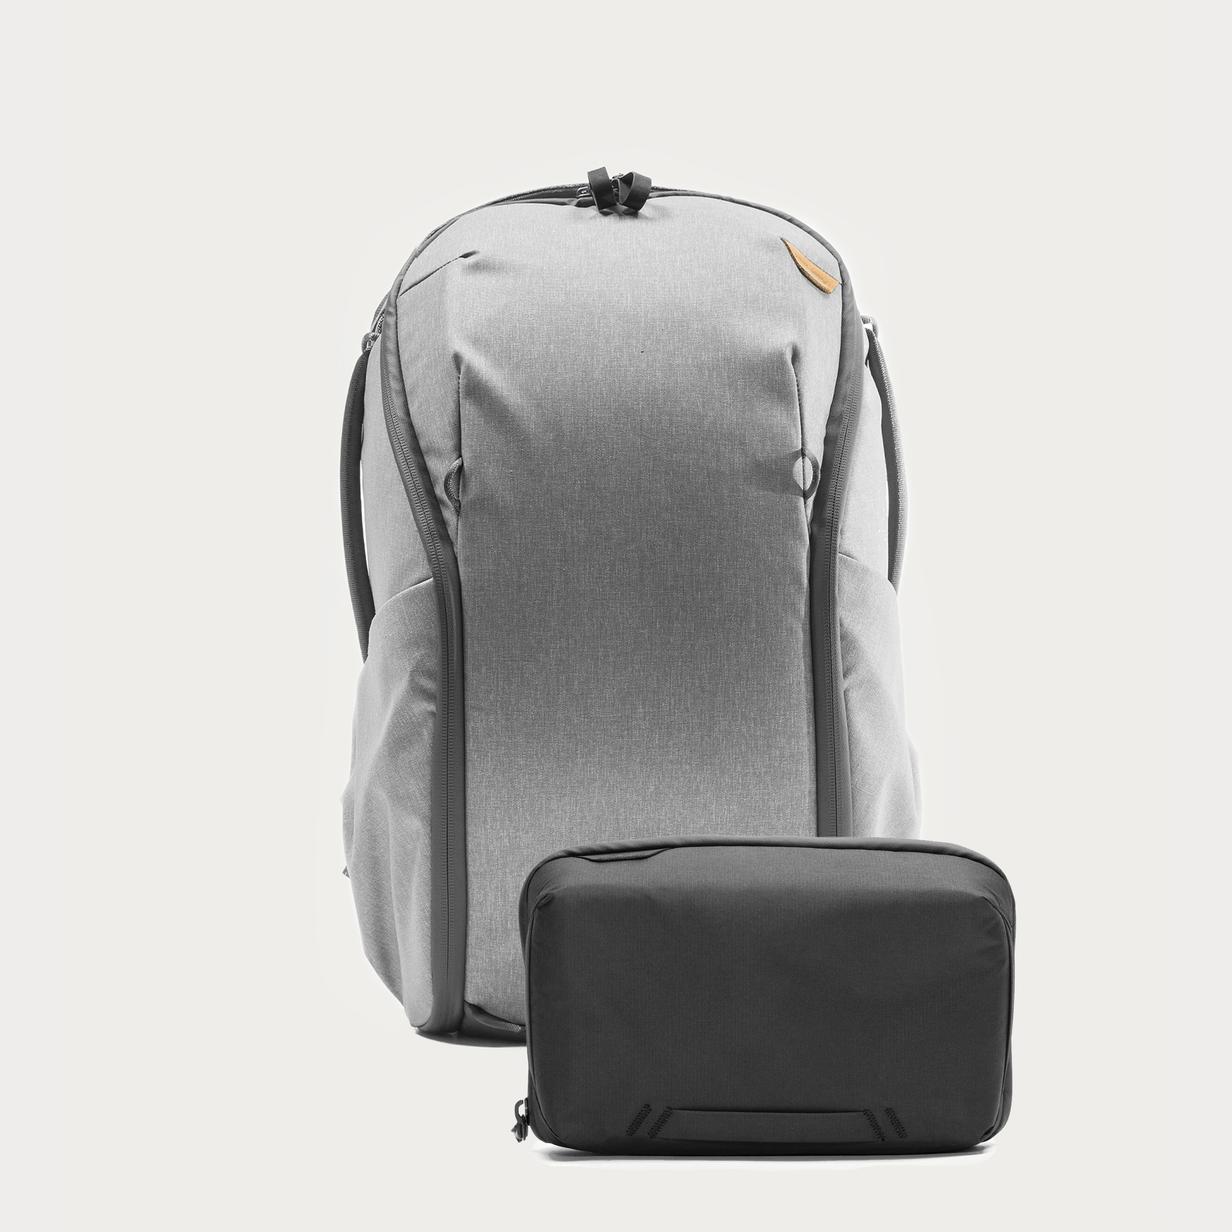 Moment Everyday Backpack Zip 20 L and Tech Pouch Bundle 01